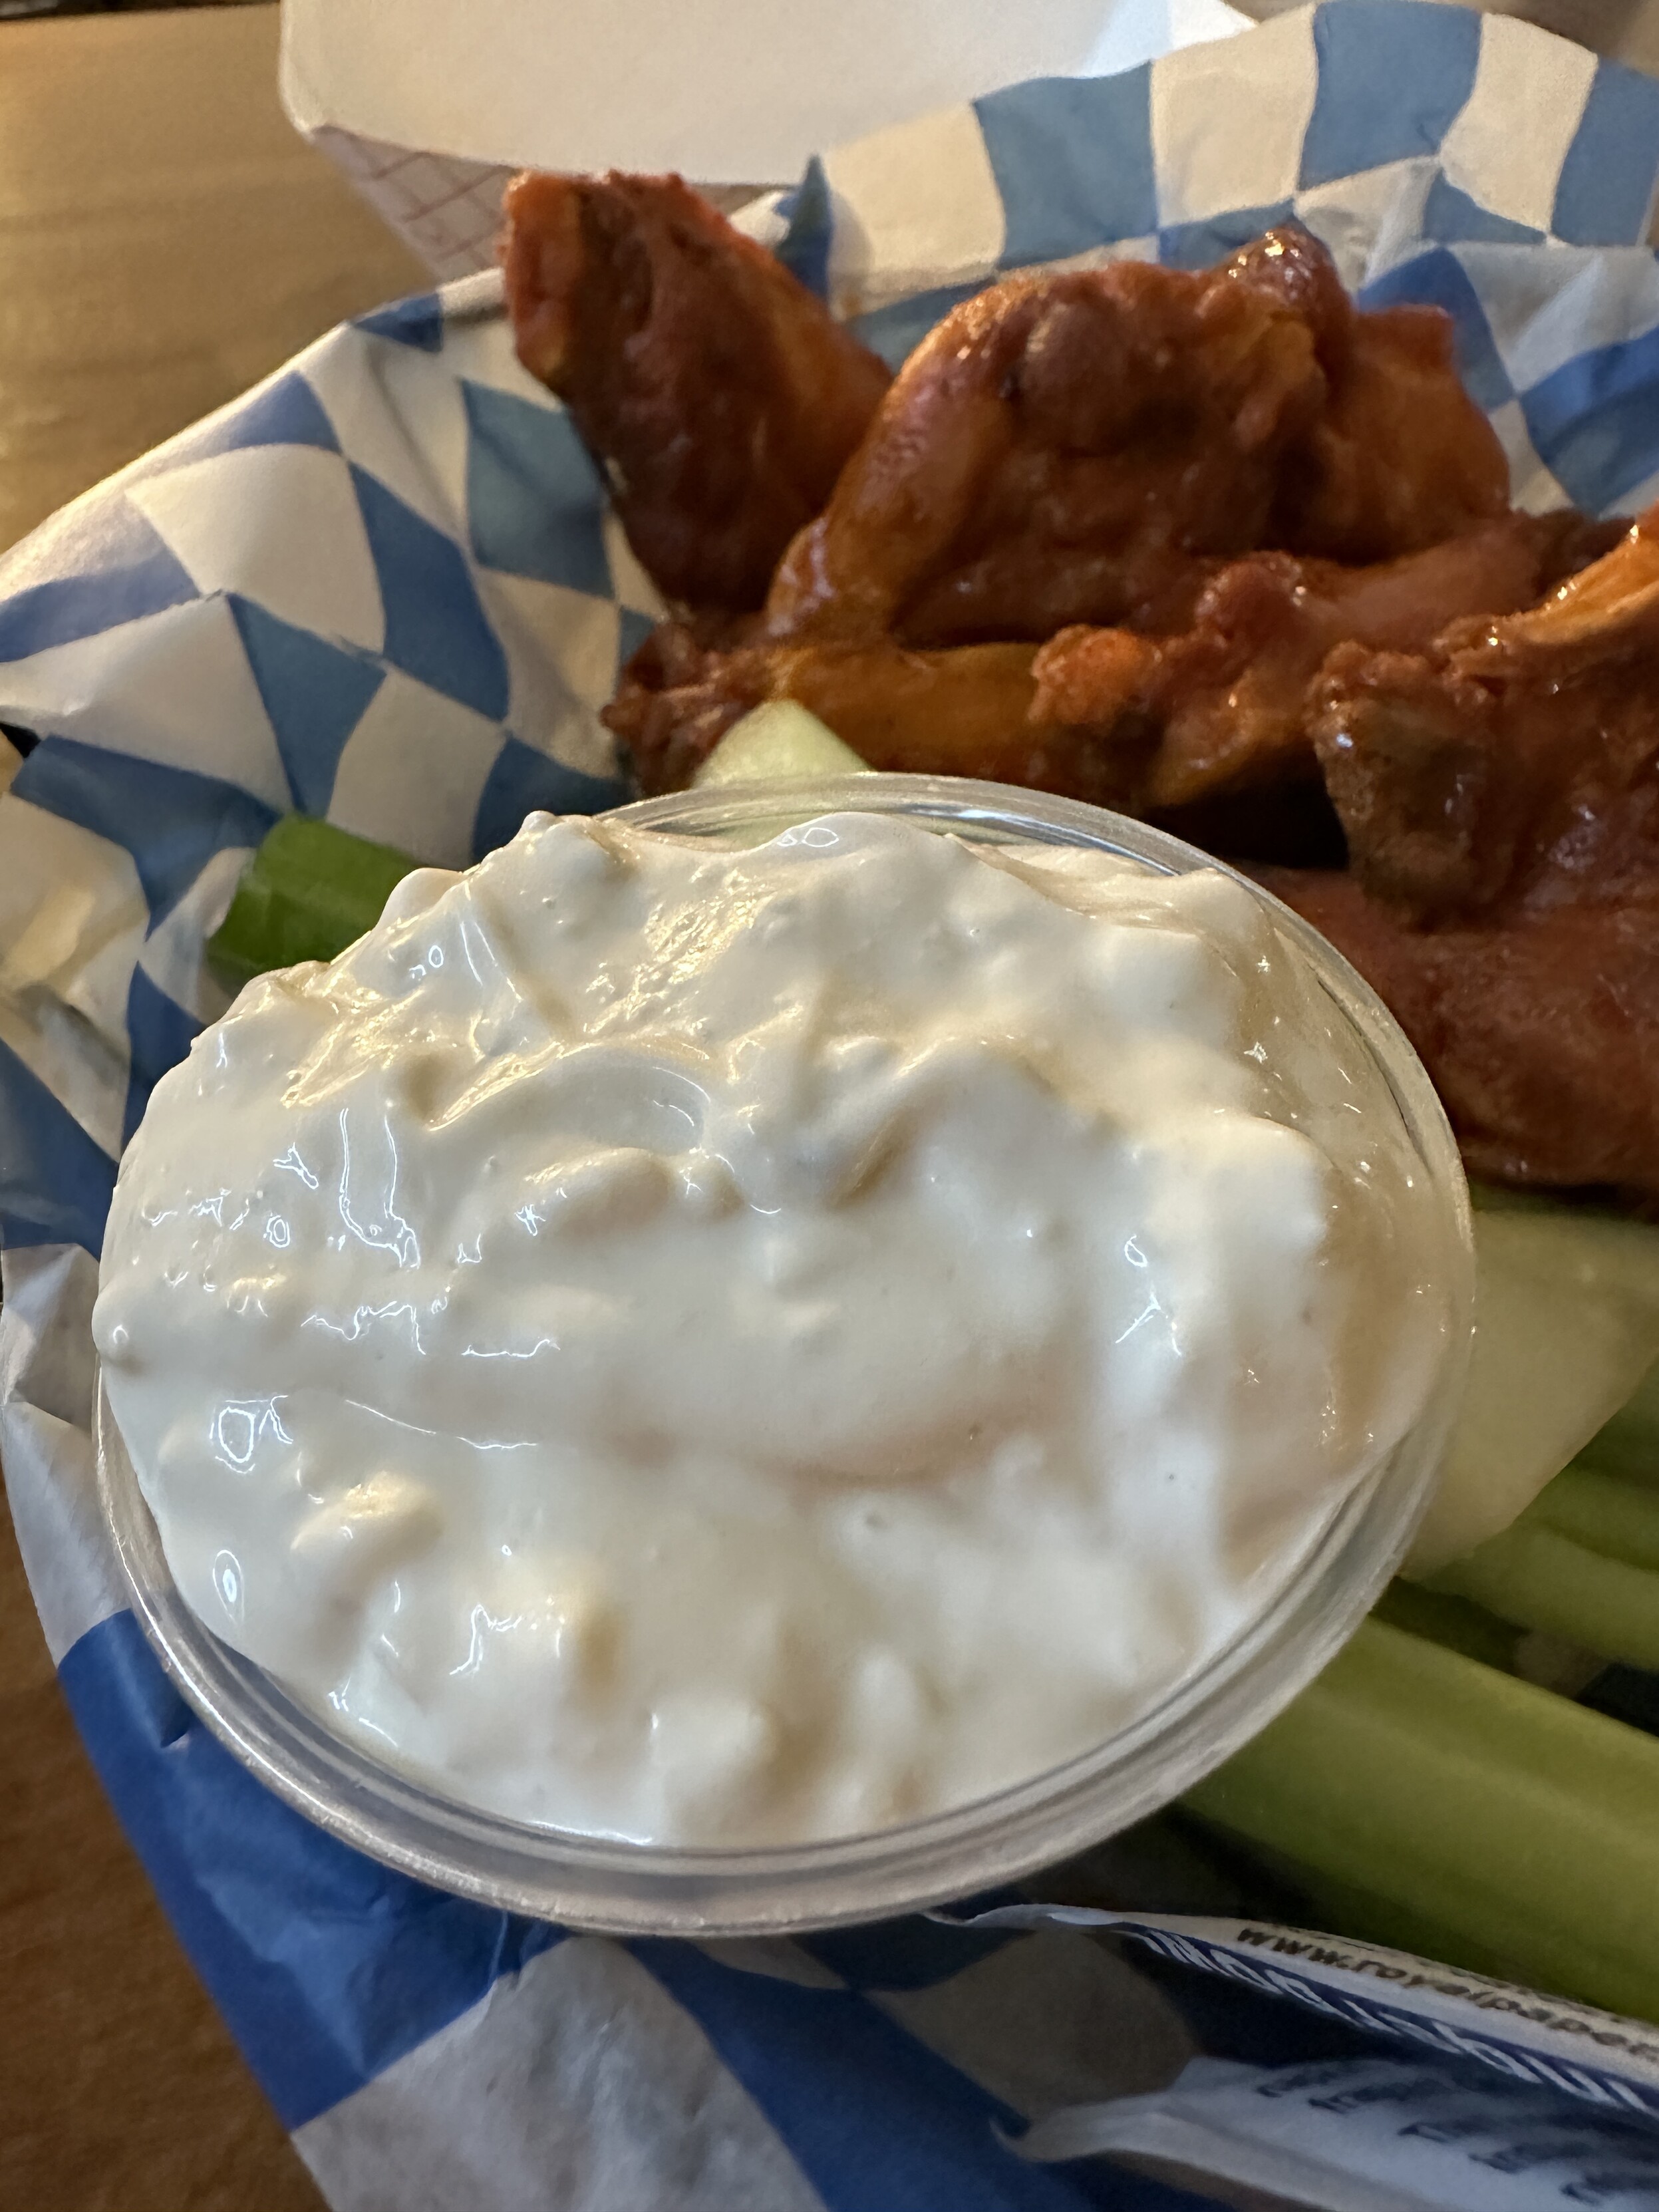 Giant cup of homemade blue cheese sitting in a basket of chicken wings and celery with a blue and white checkered paper liner